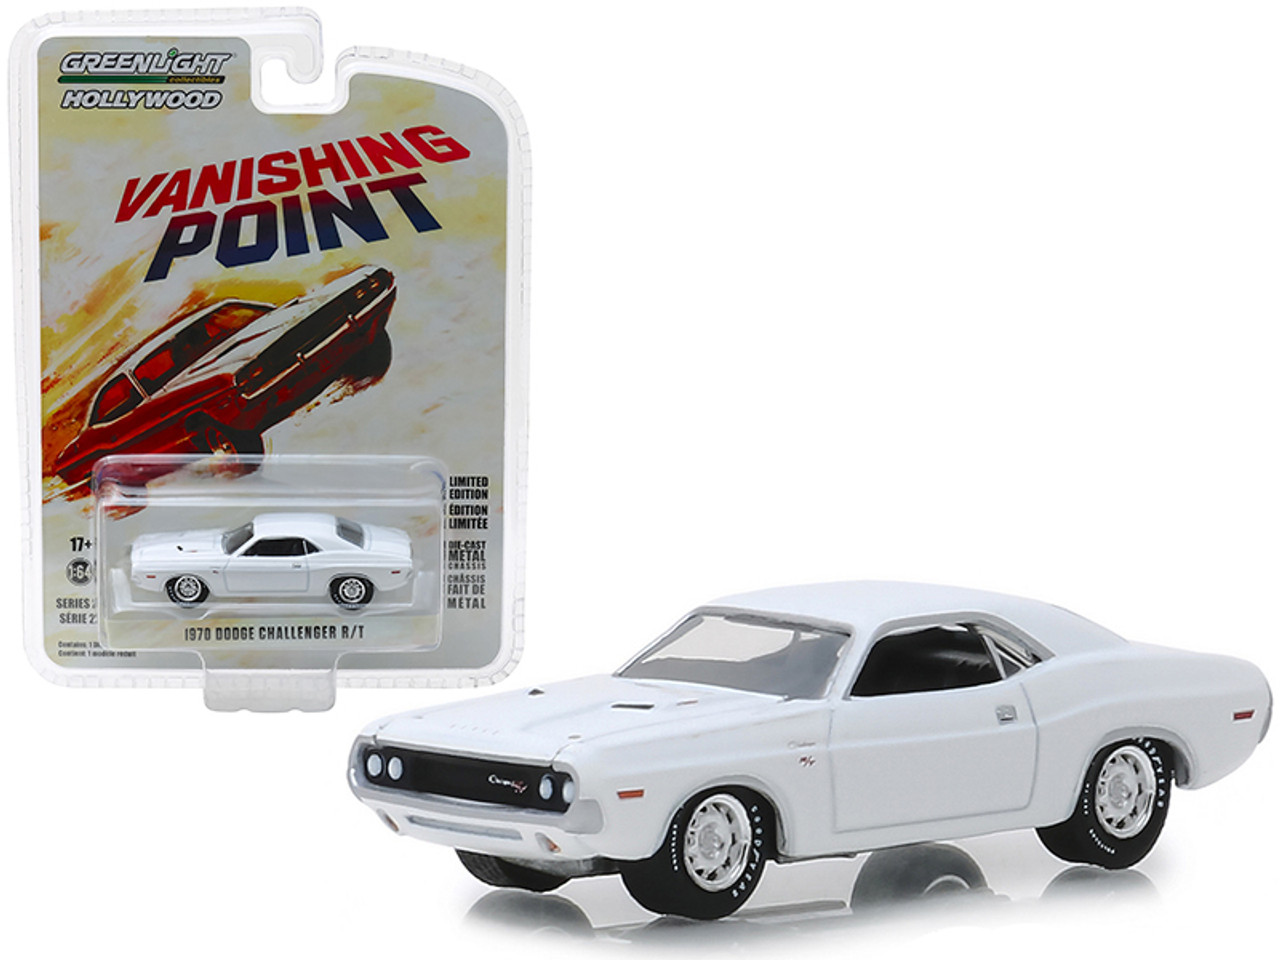 1970 Dodge Challenger R/T White "Vanishing Point" (1971) Movie "Hollywood" Series 22 1/64 Diecast Model Car by Greenlight